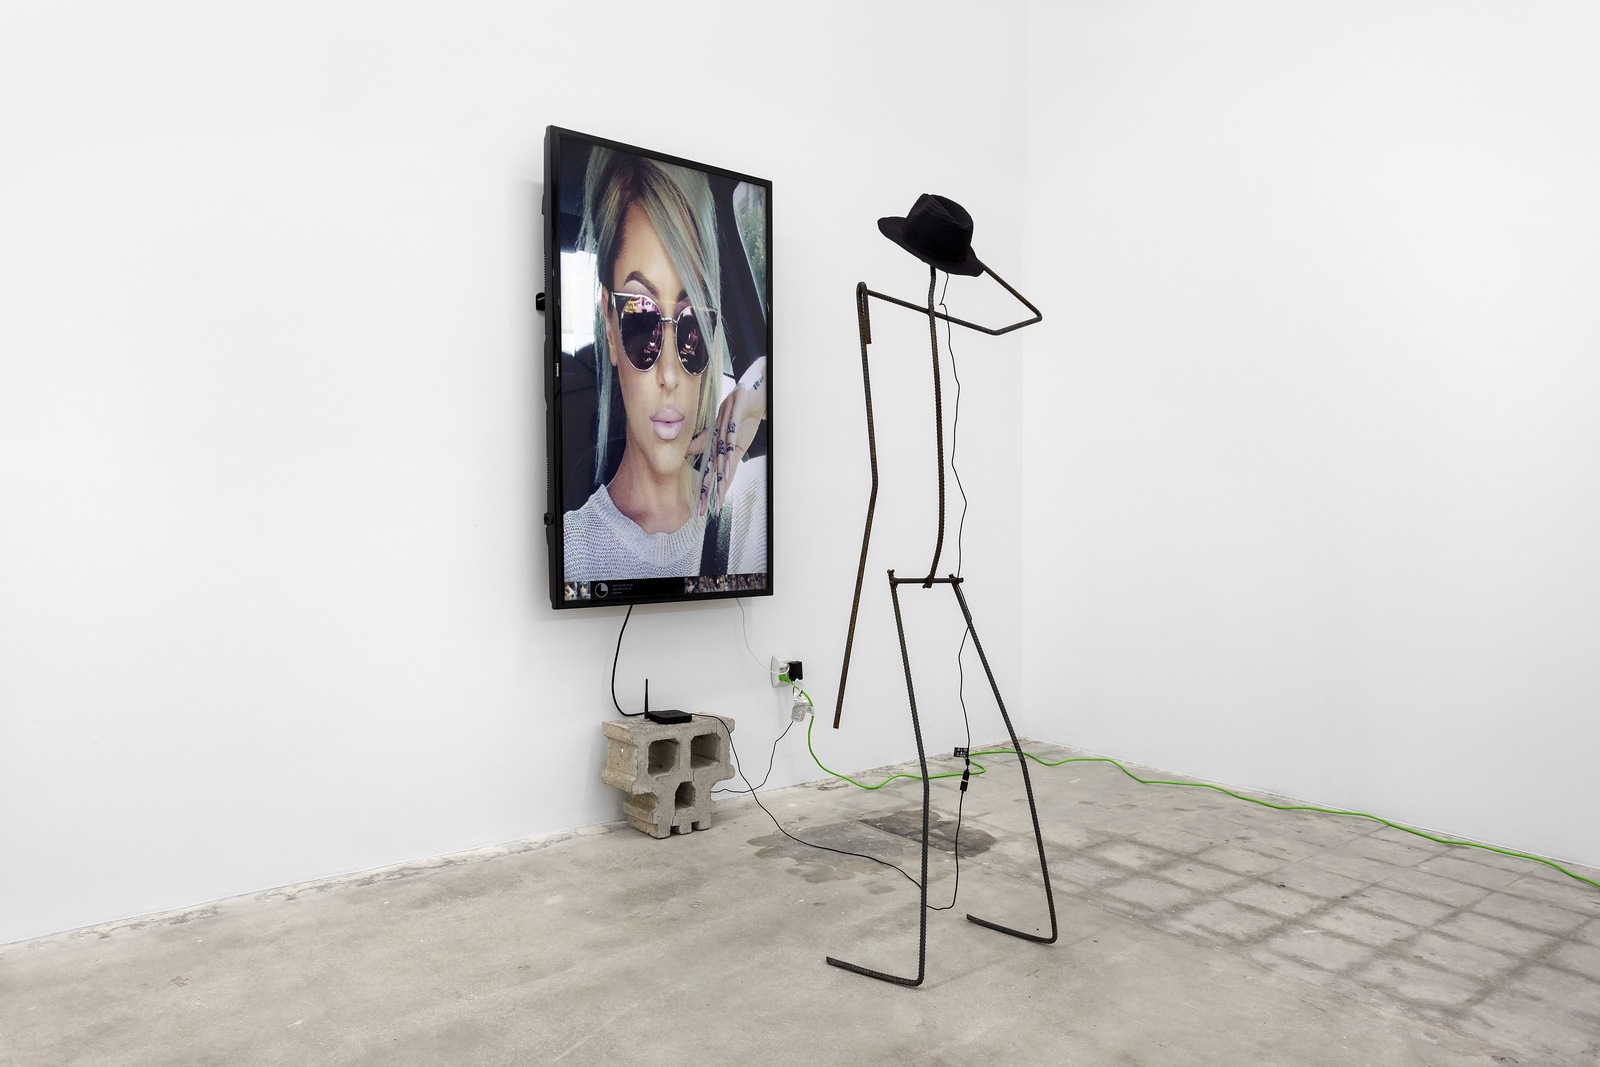 Versteeg_Permanent Vacation_Cement, welded steel, internet-connected computer program with output to 65 inch LCD screen, web cam, straw hat_2016